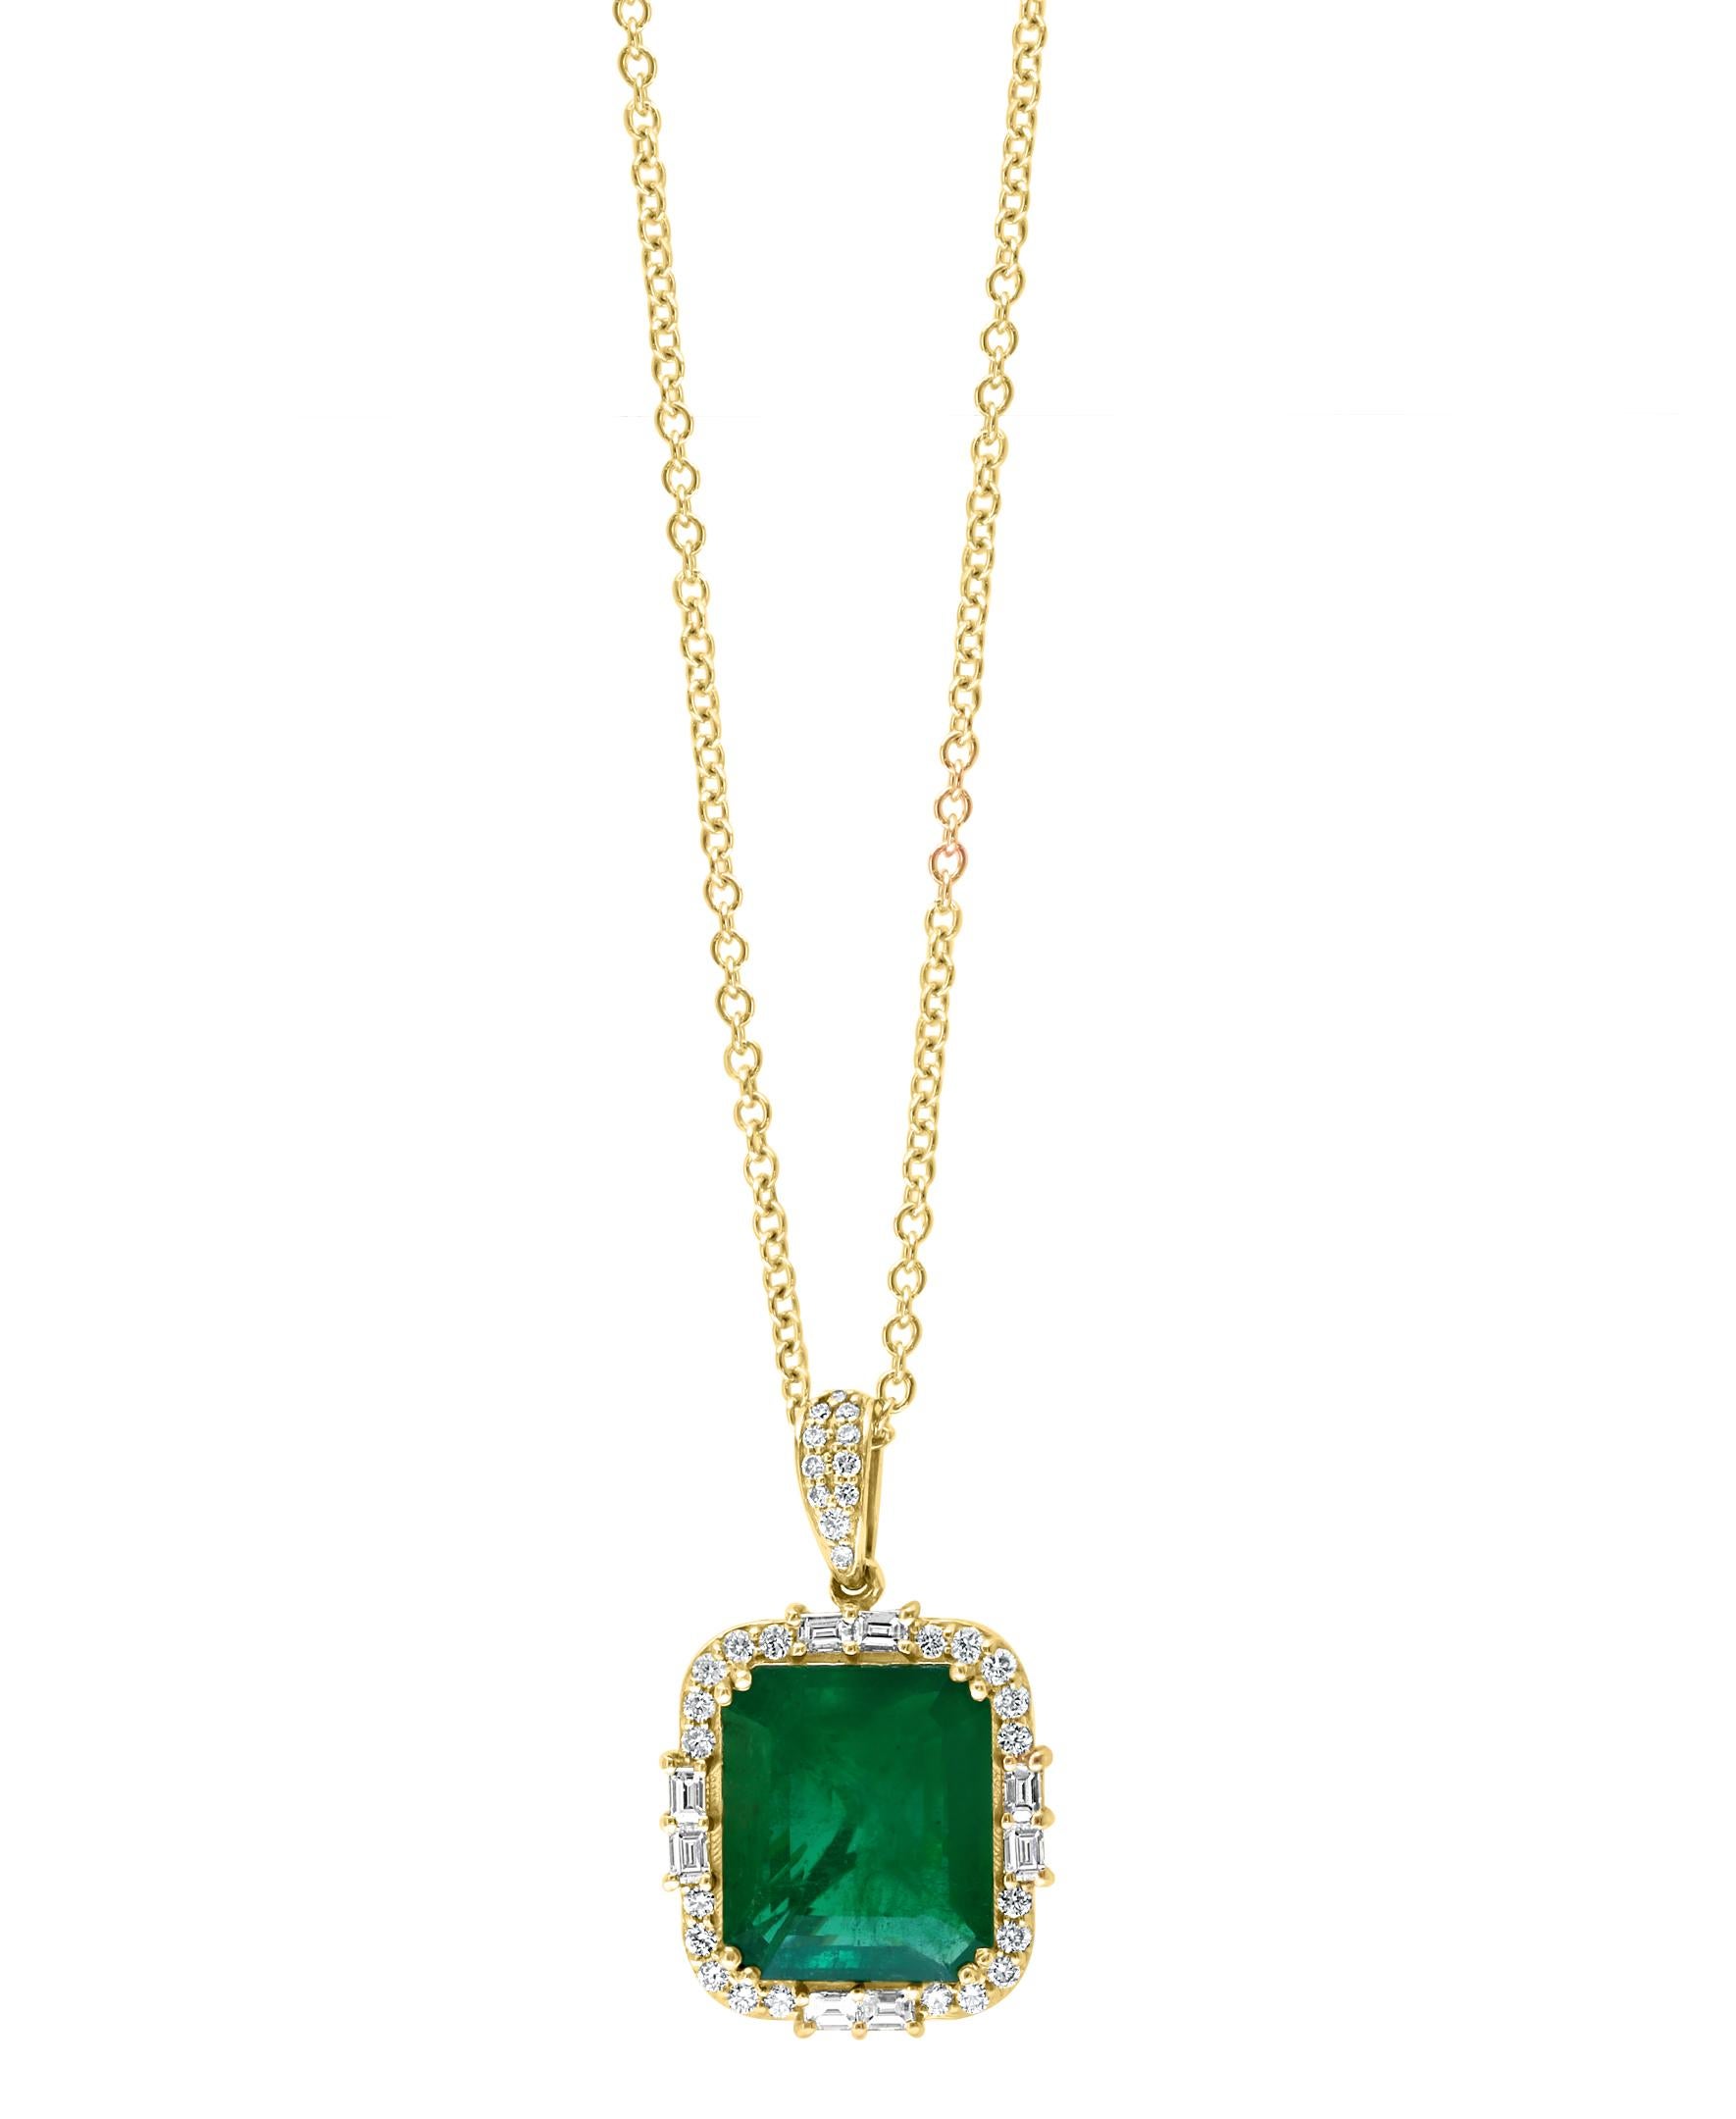 This Effy Hematian design pendant is set in 14K yellow gold. 
The Emerald is emerald cut in shape and the weight is 11.69 ct.
The diamonds are round & baguette in shape and the total weight is 1.31 ct.
The chain on this pendant is 18 inches in